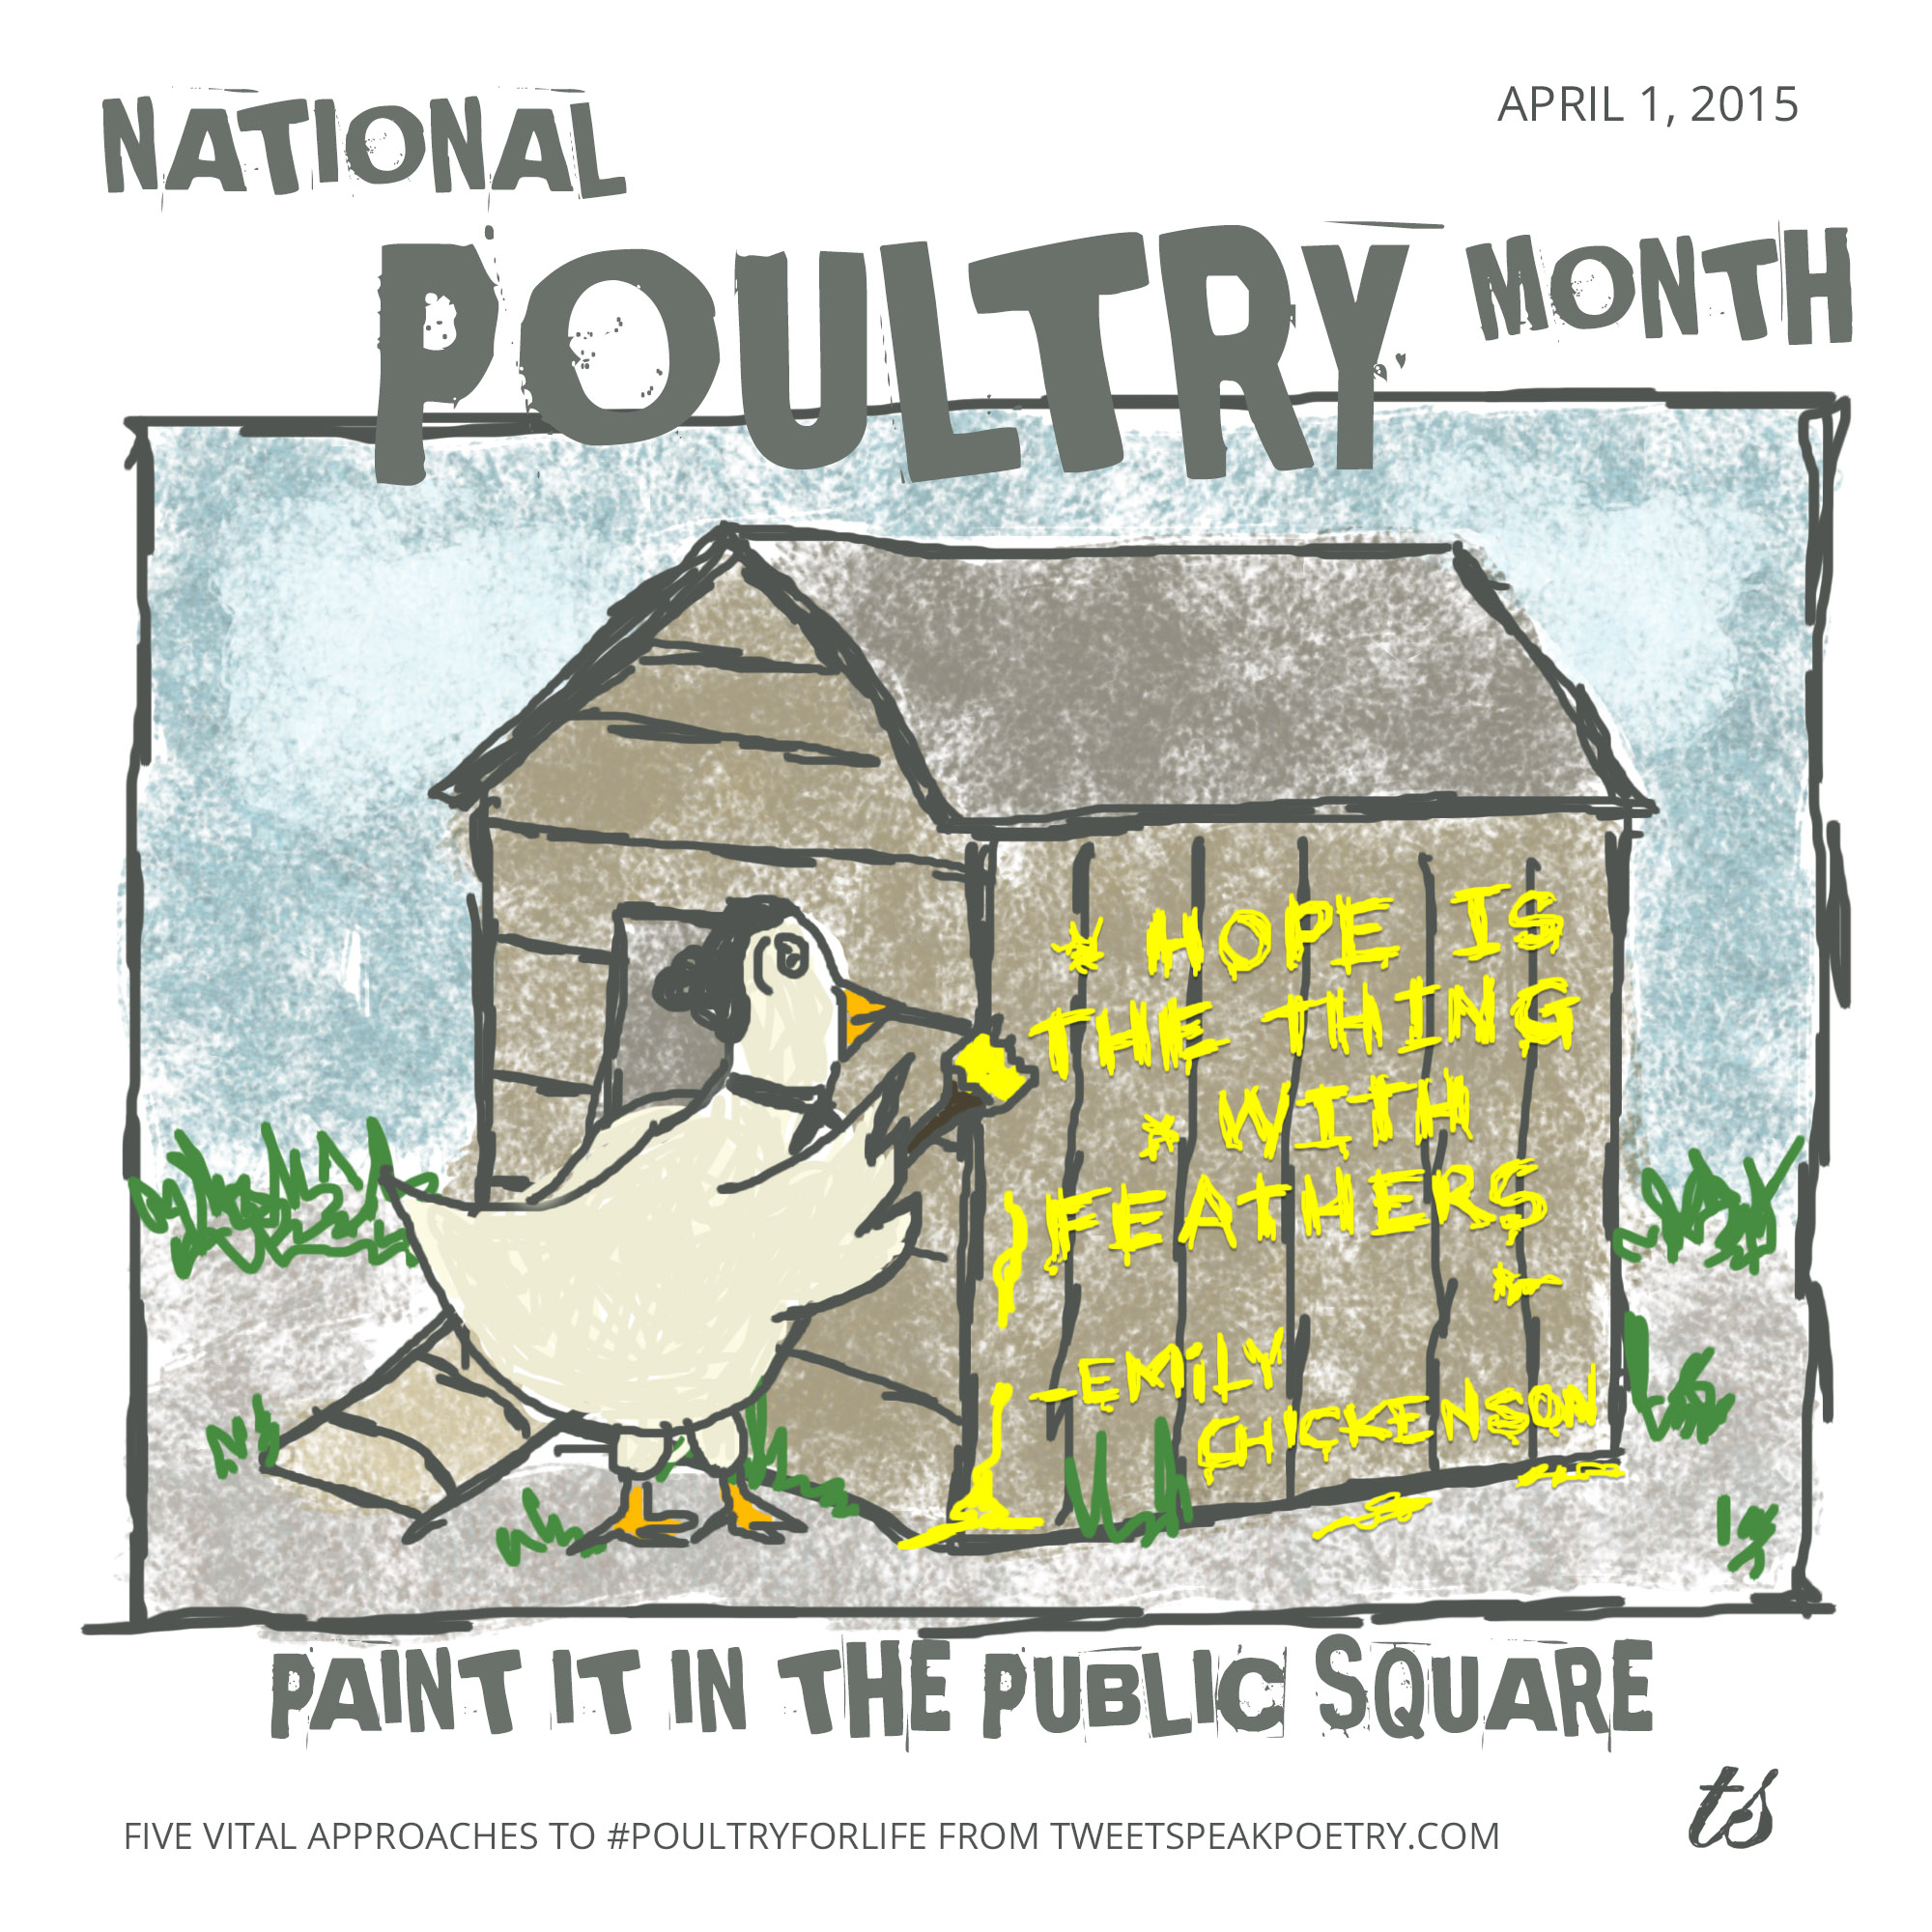 Poultry for Life: Paint it in the Public Square